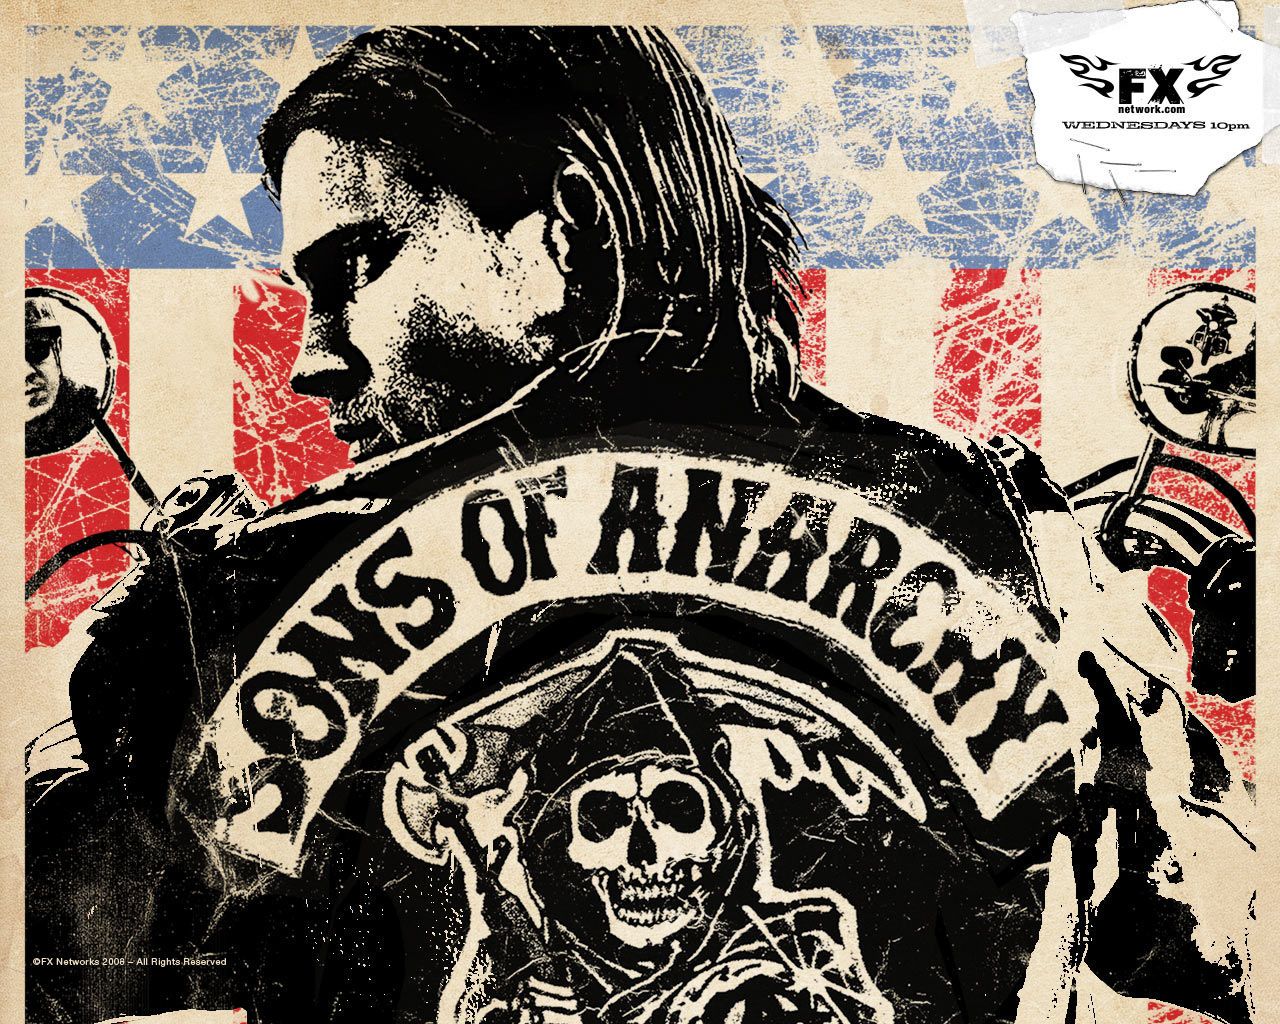 Sons of Anarchy from FOX